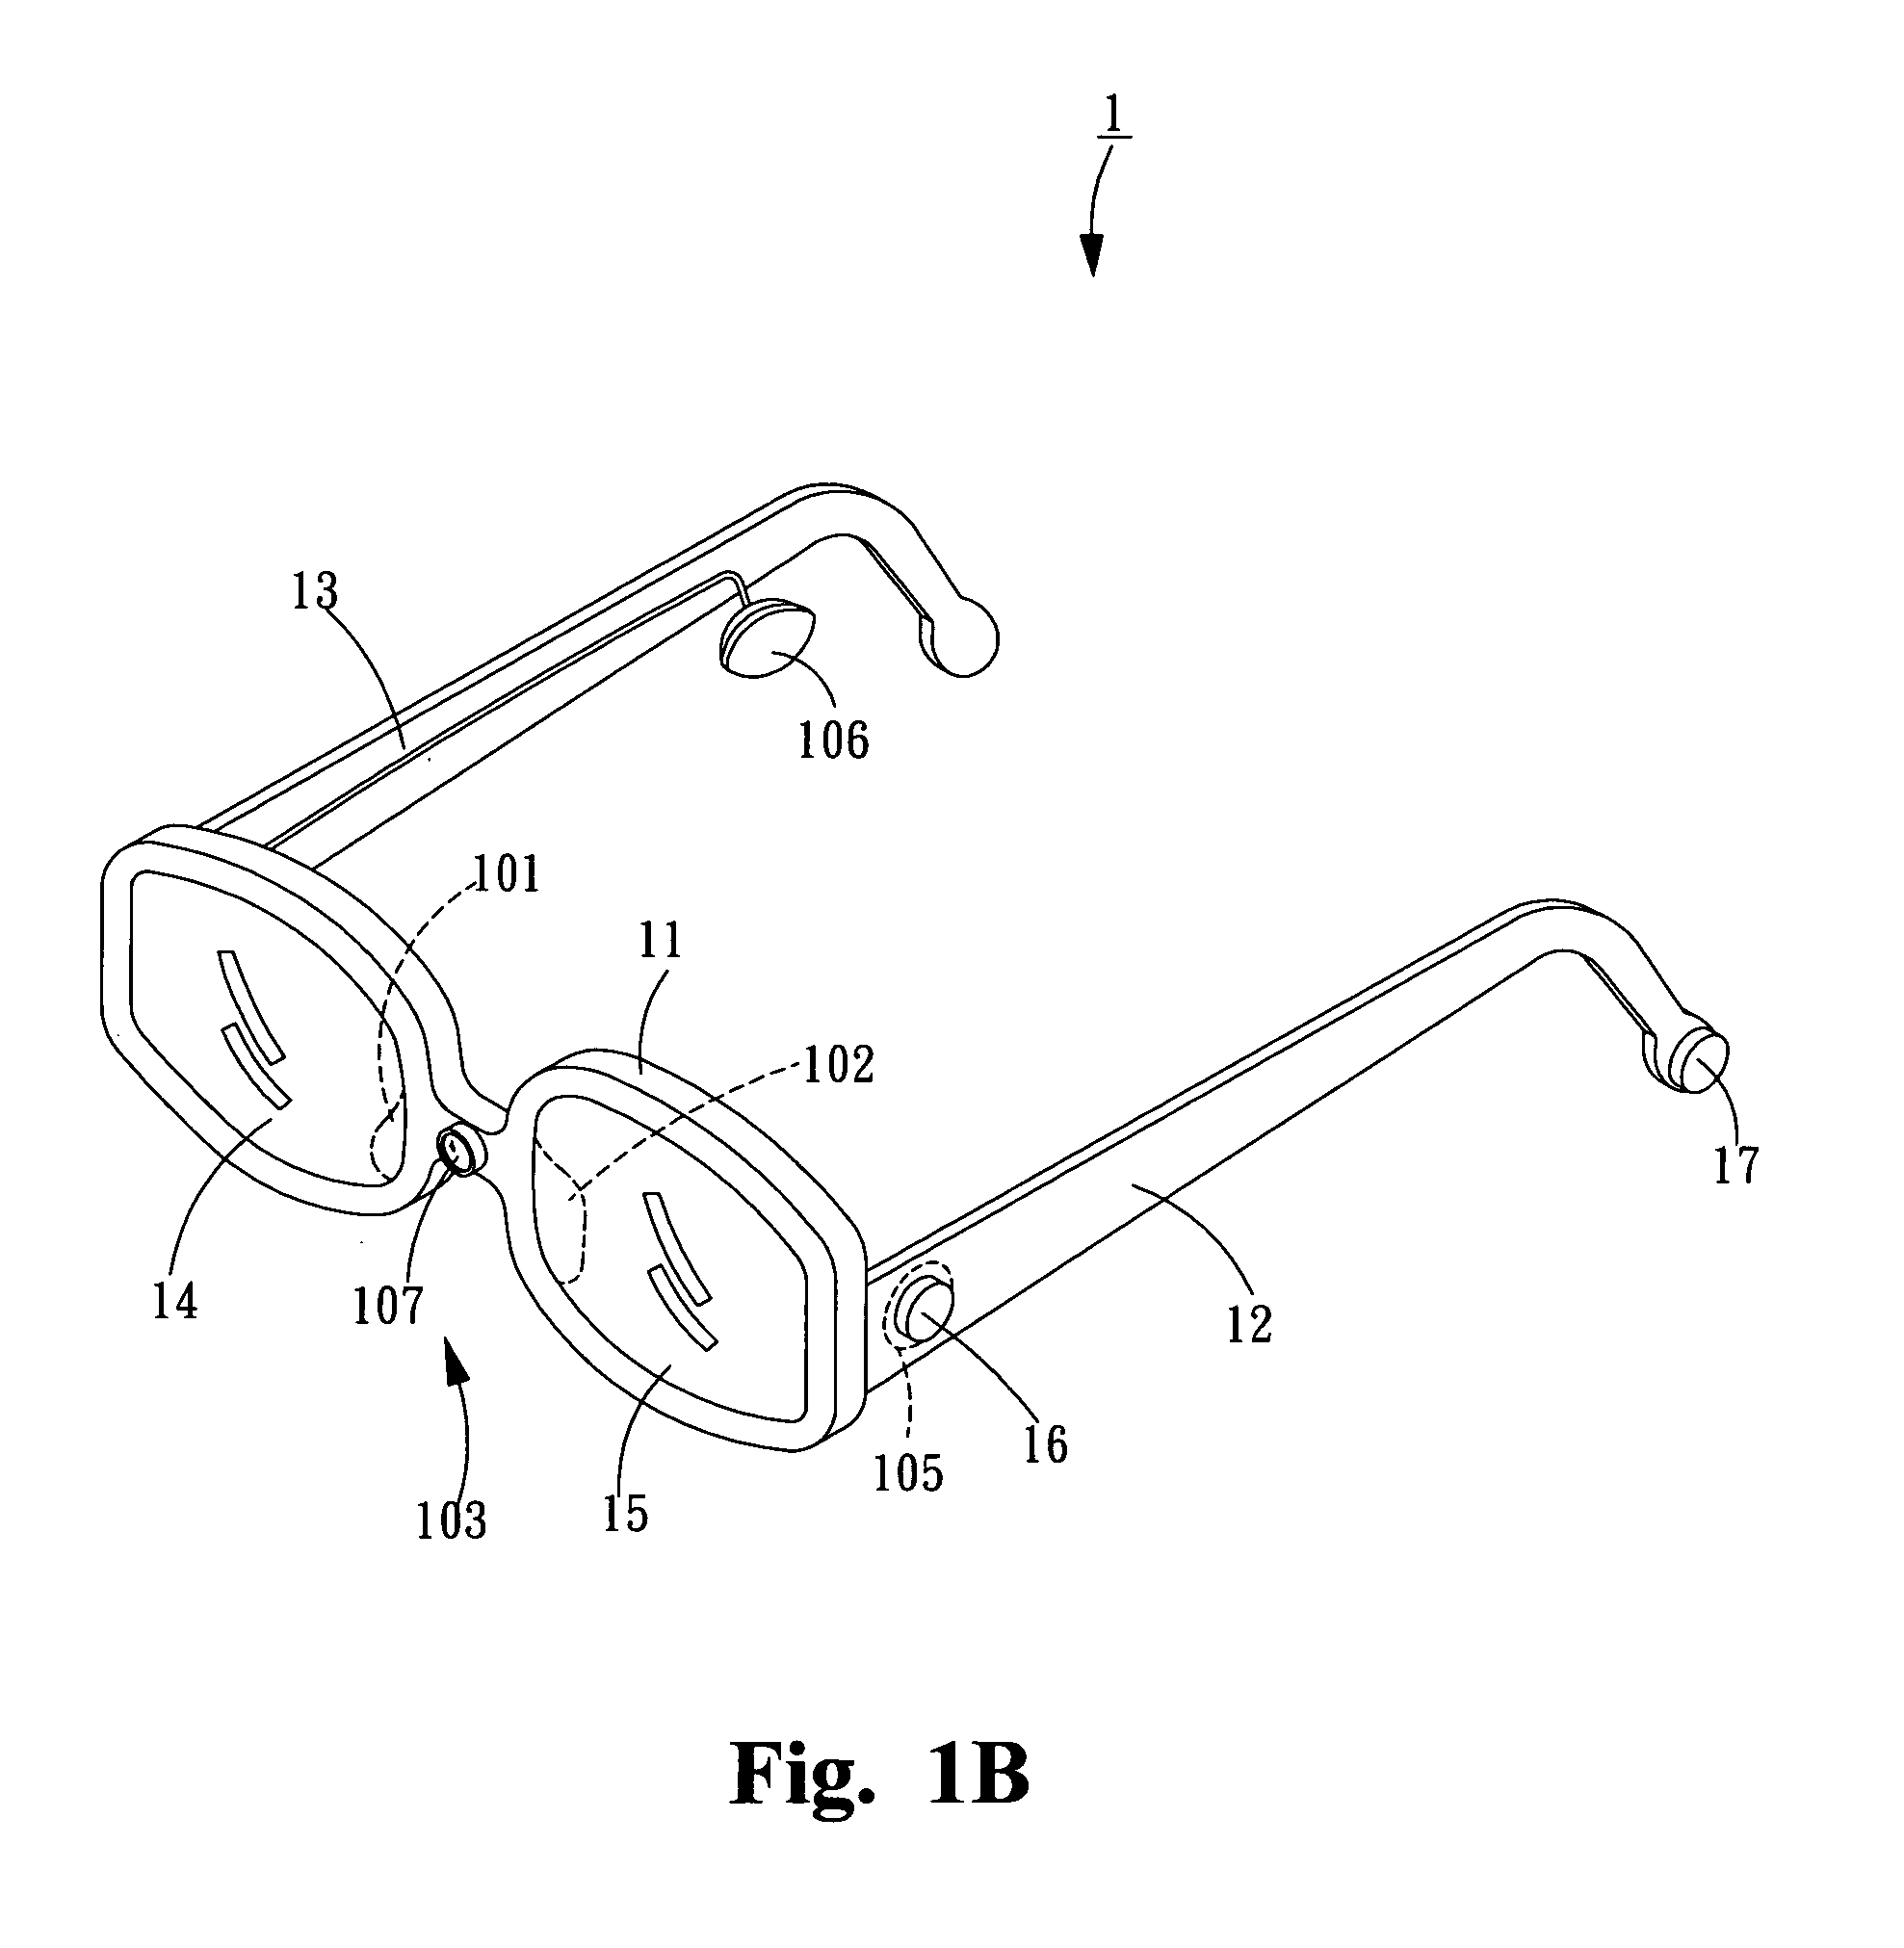 Focus adjustable head mounted display system for displaying digital contents and device for realizing the system